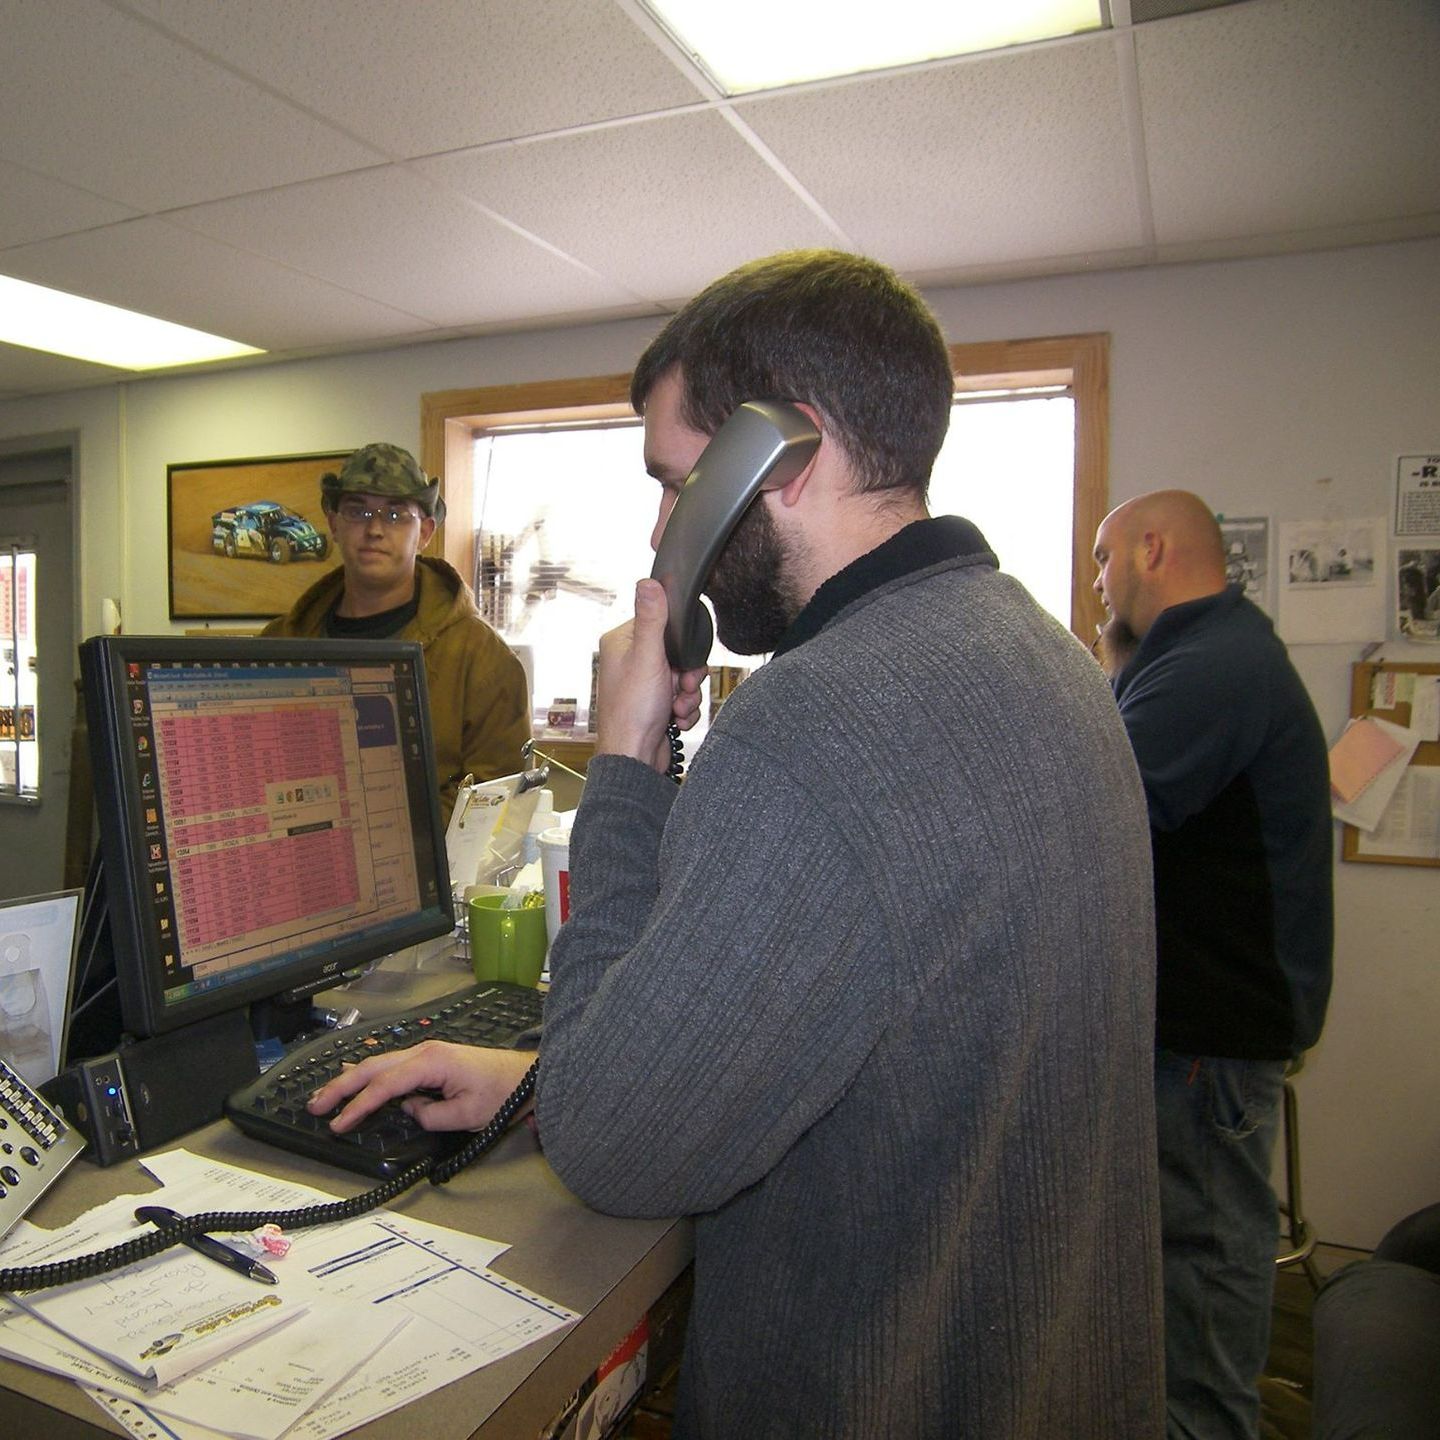 A man talking on a cell phone in front of a computer